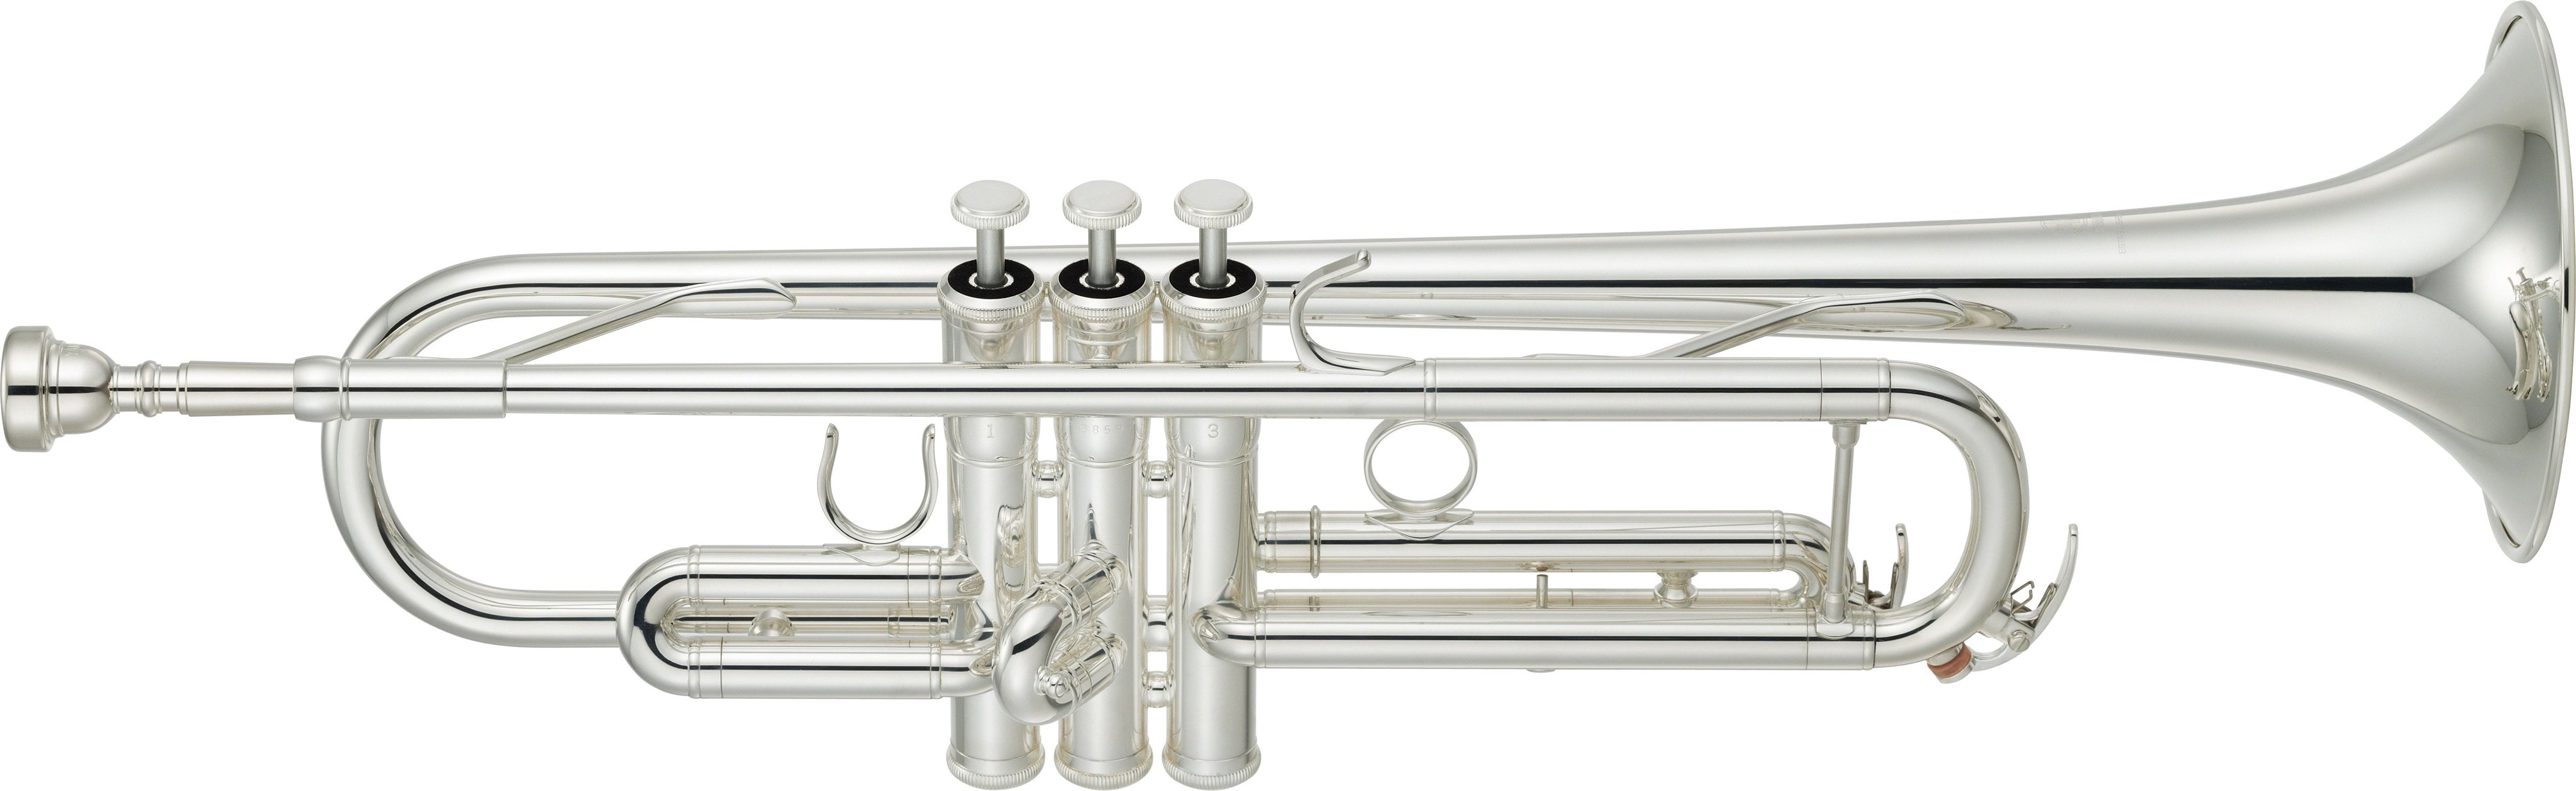 YTR-4335GII - Overview - Bb Trumpets - Trumpets - Brass 